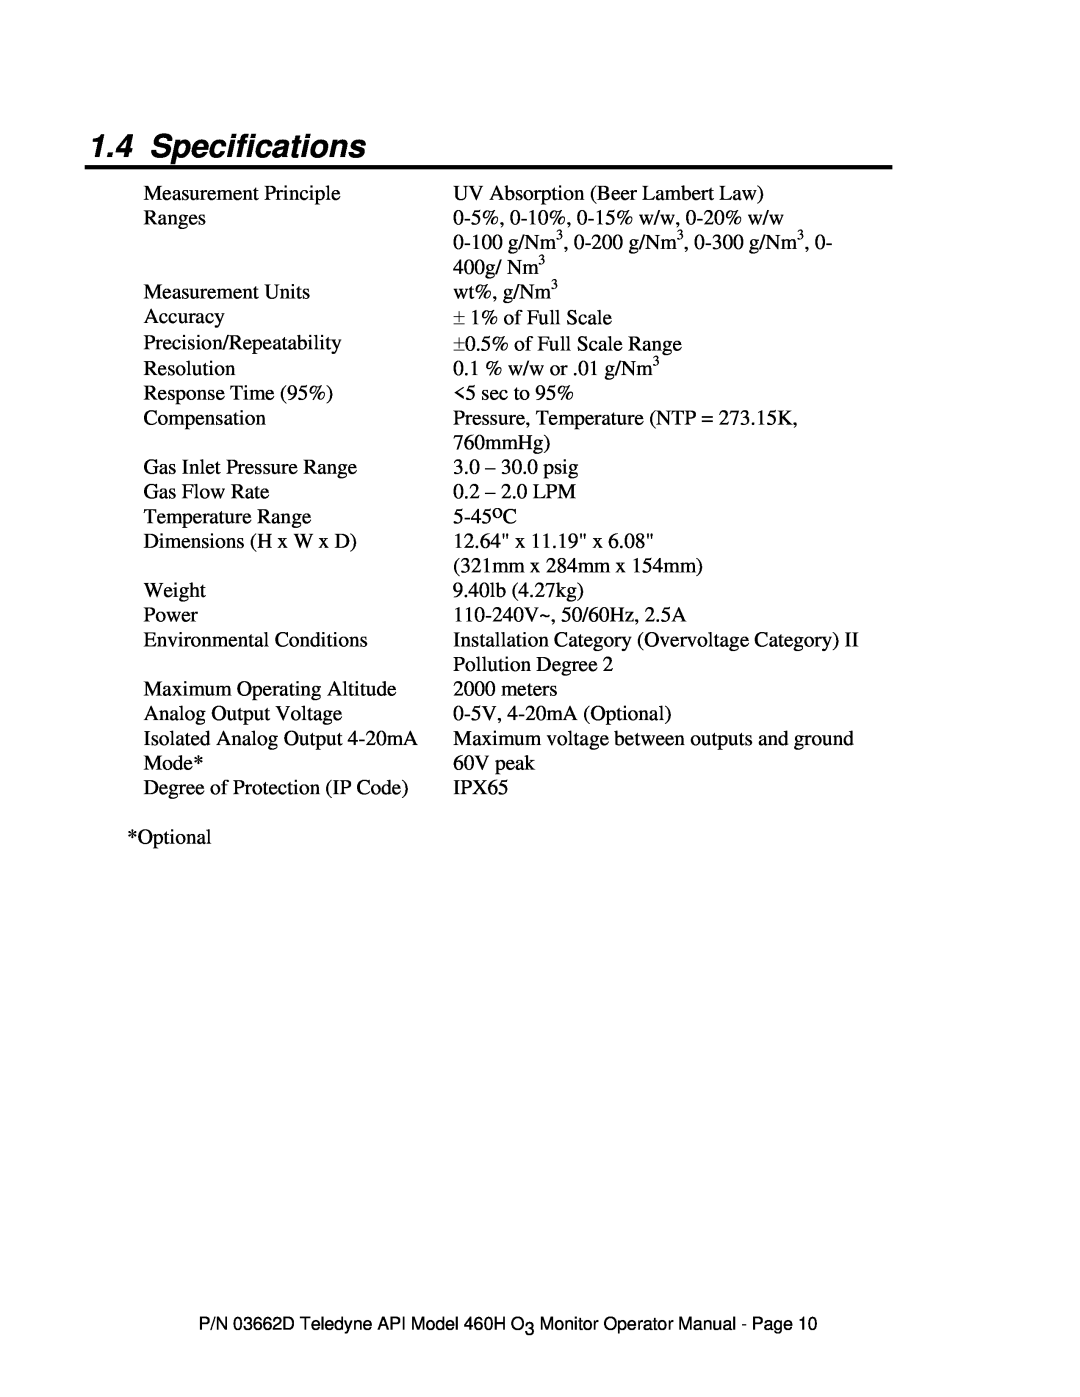 Teledyne 460H instruction manual Specifications 